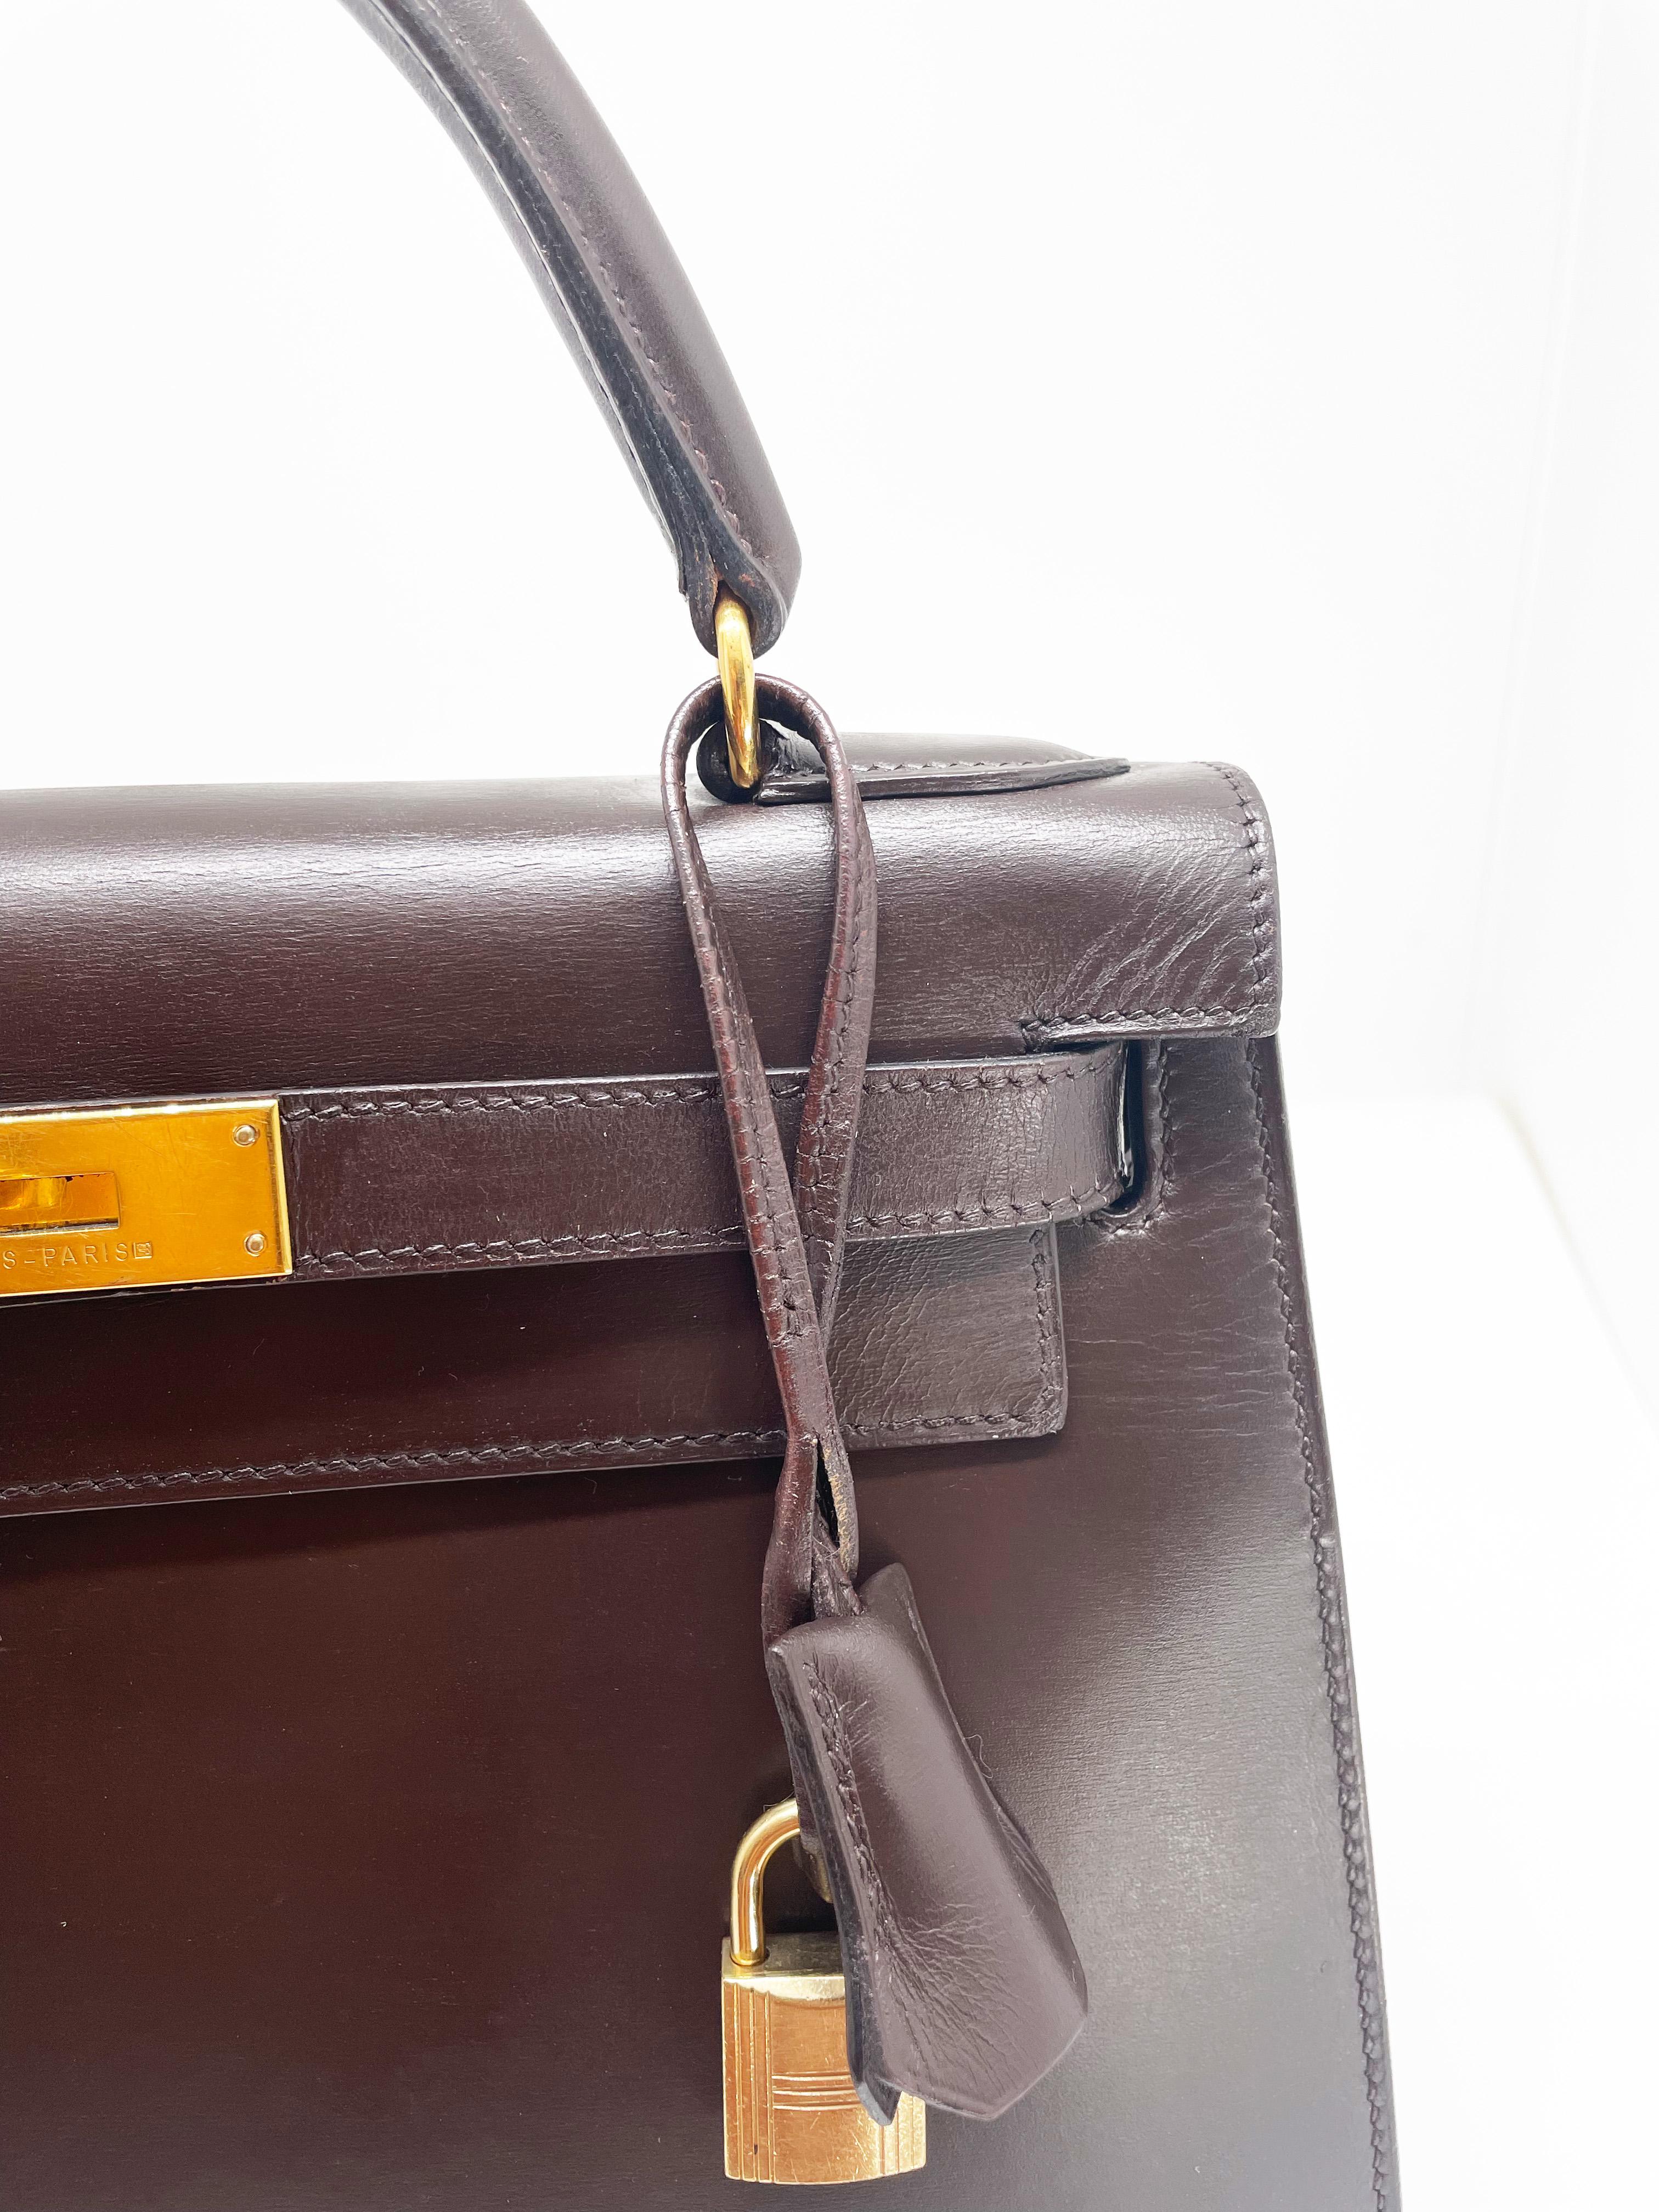 Hermès Kelly 28 sellier chocolate bag in box leather 3